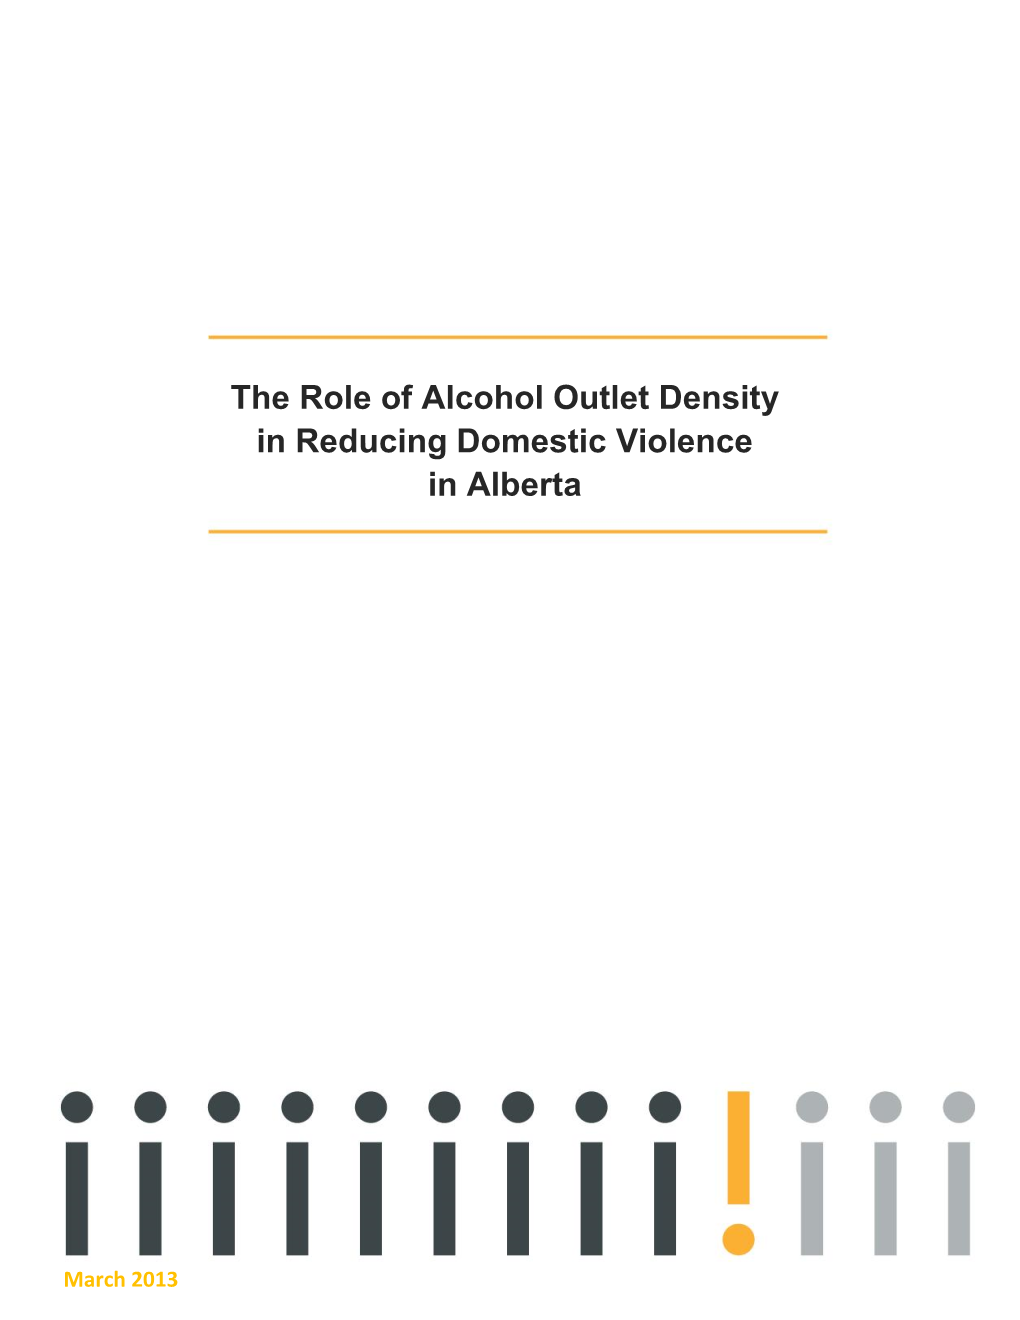 The Role of Alcohol Outlet Density in Reducing Domestic Violence in Alberta